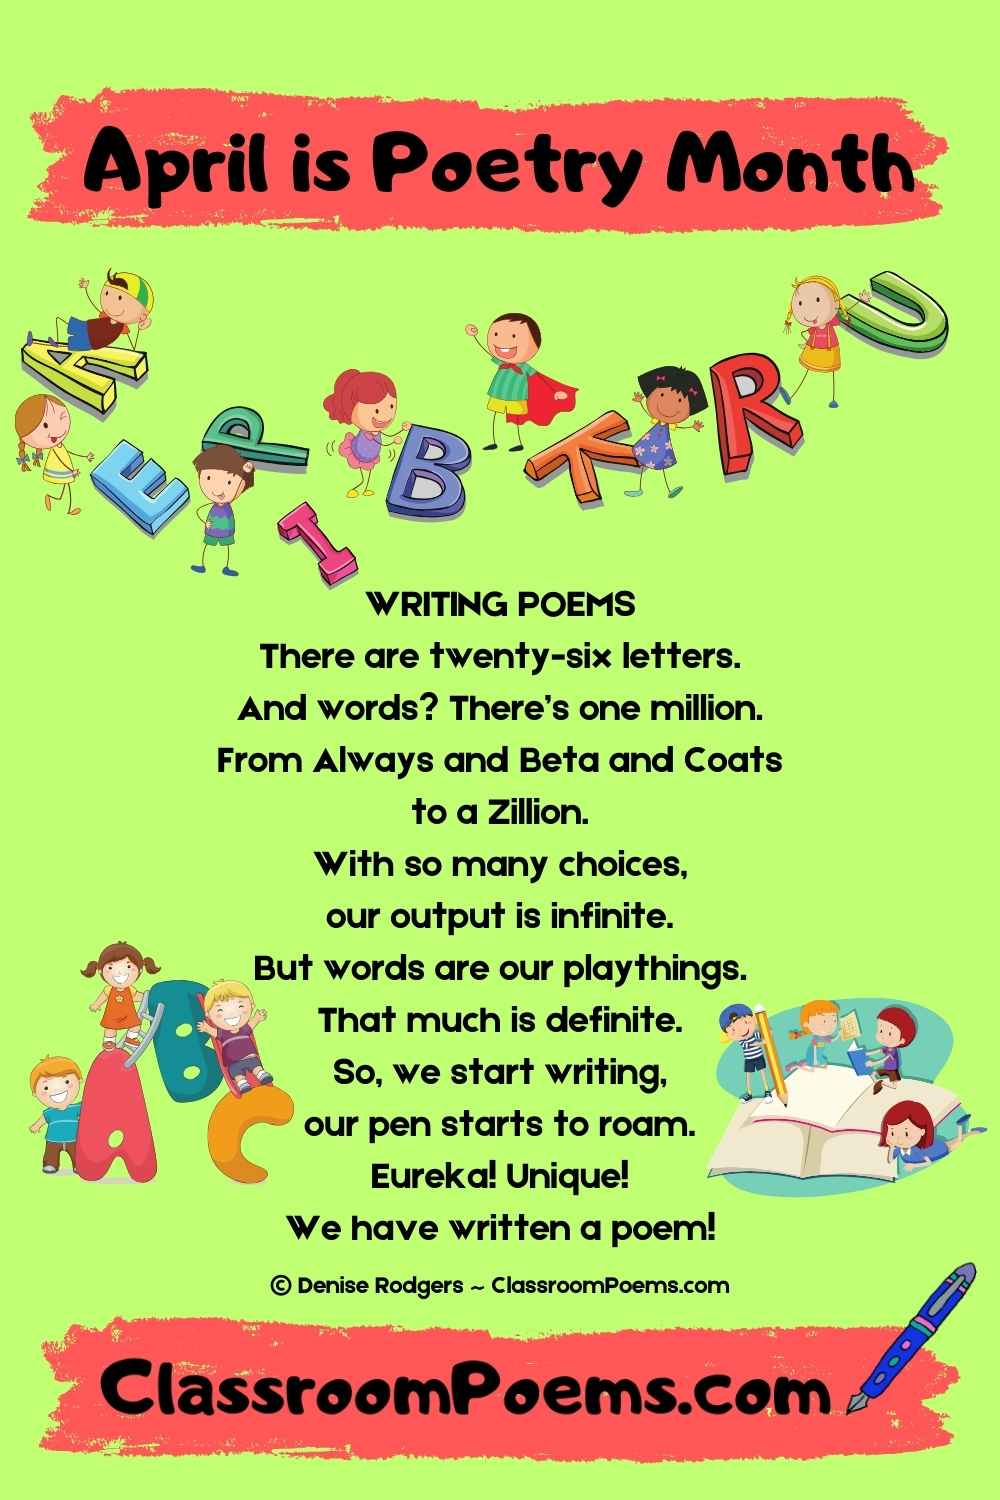 April is Poetry Month. Enjoy these poems about poems by Denise Rodgers on ClassroomPoems.com.